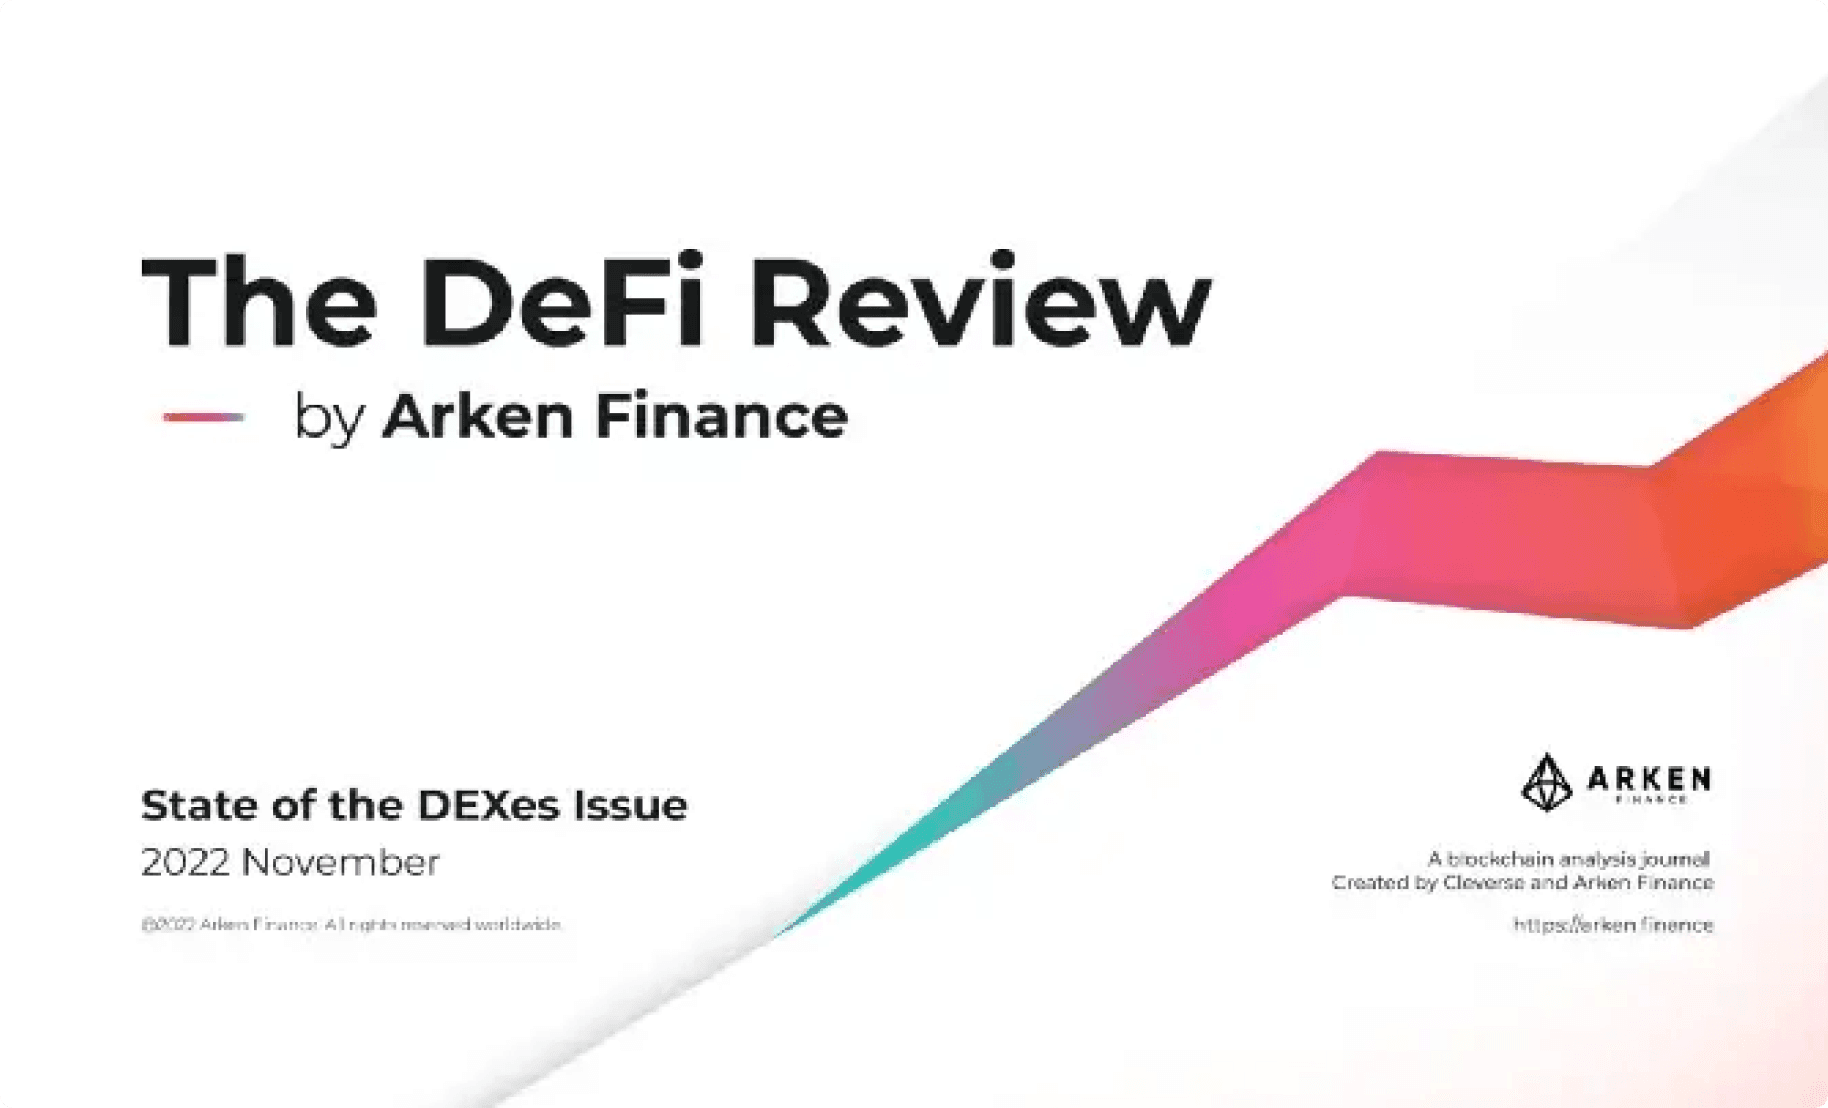 The DeFi Review